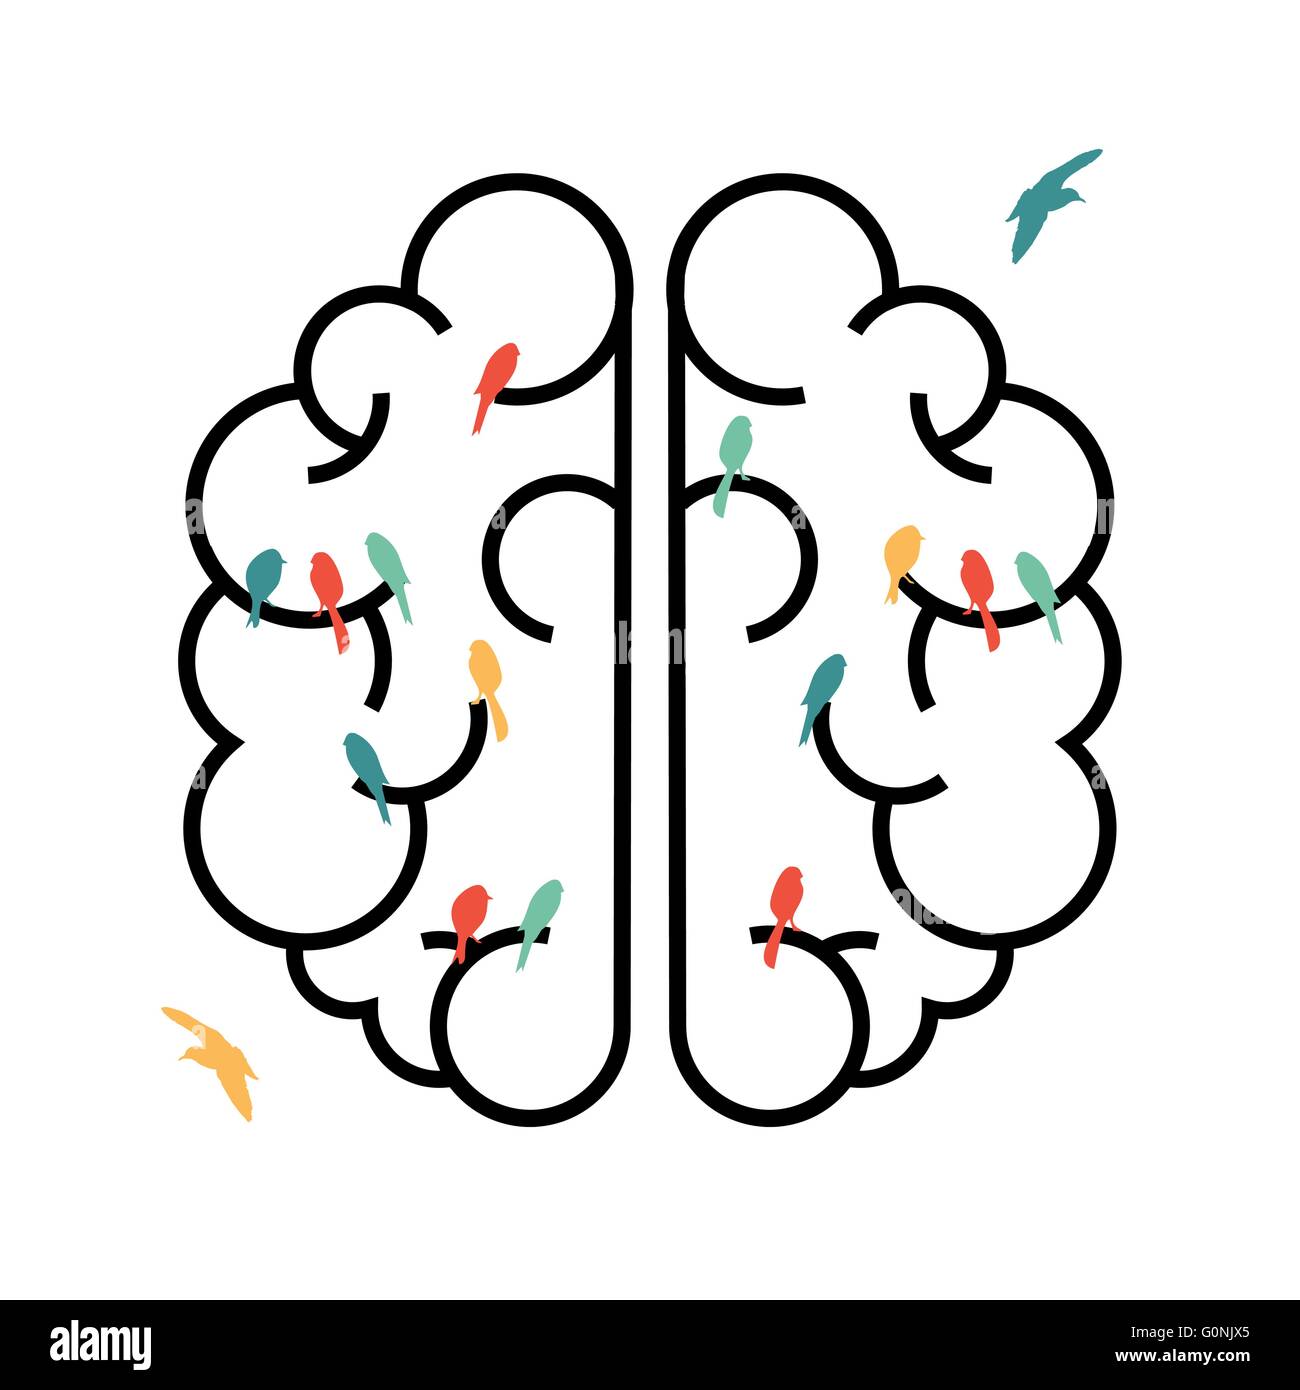 Human brain in simple line art style with colorful bird shapes inside, free your creative imagination concept design. Stock Vector